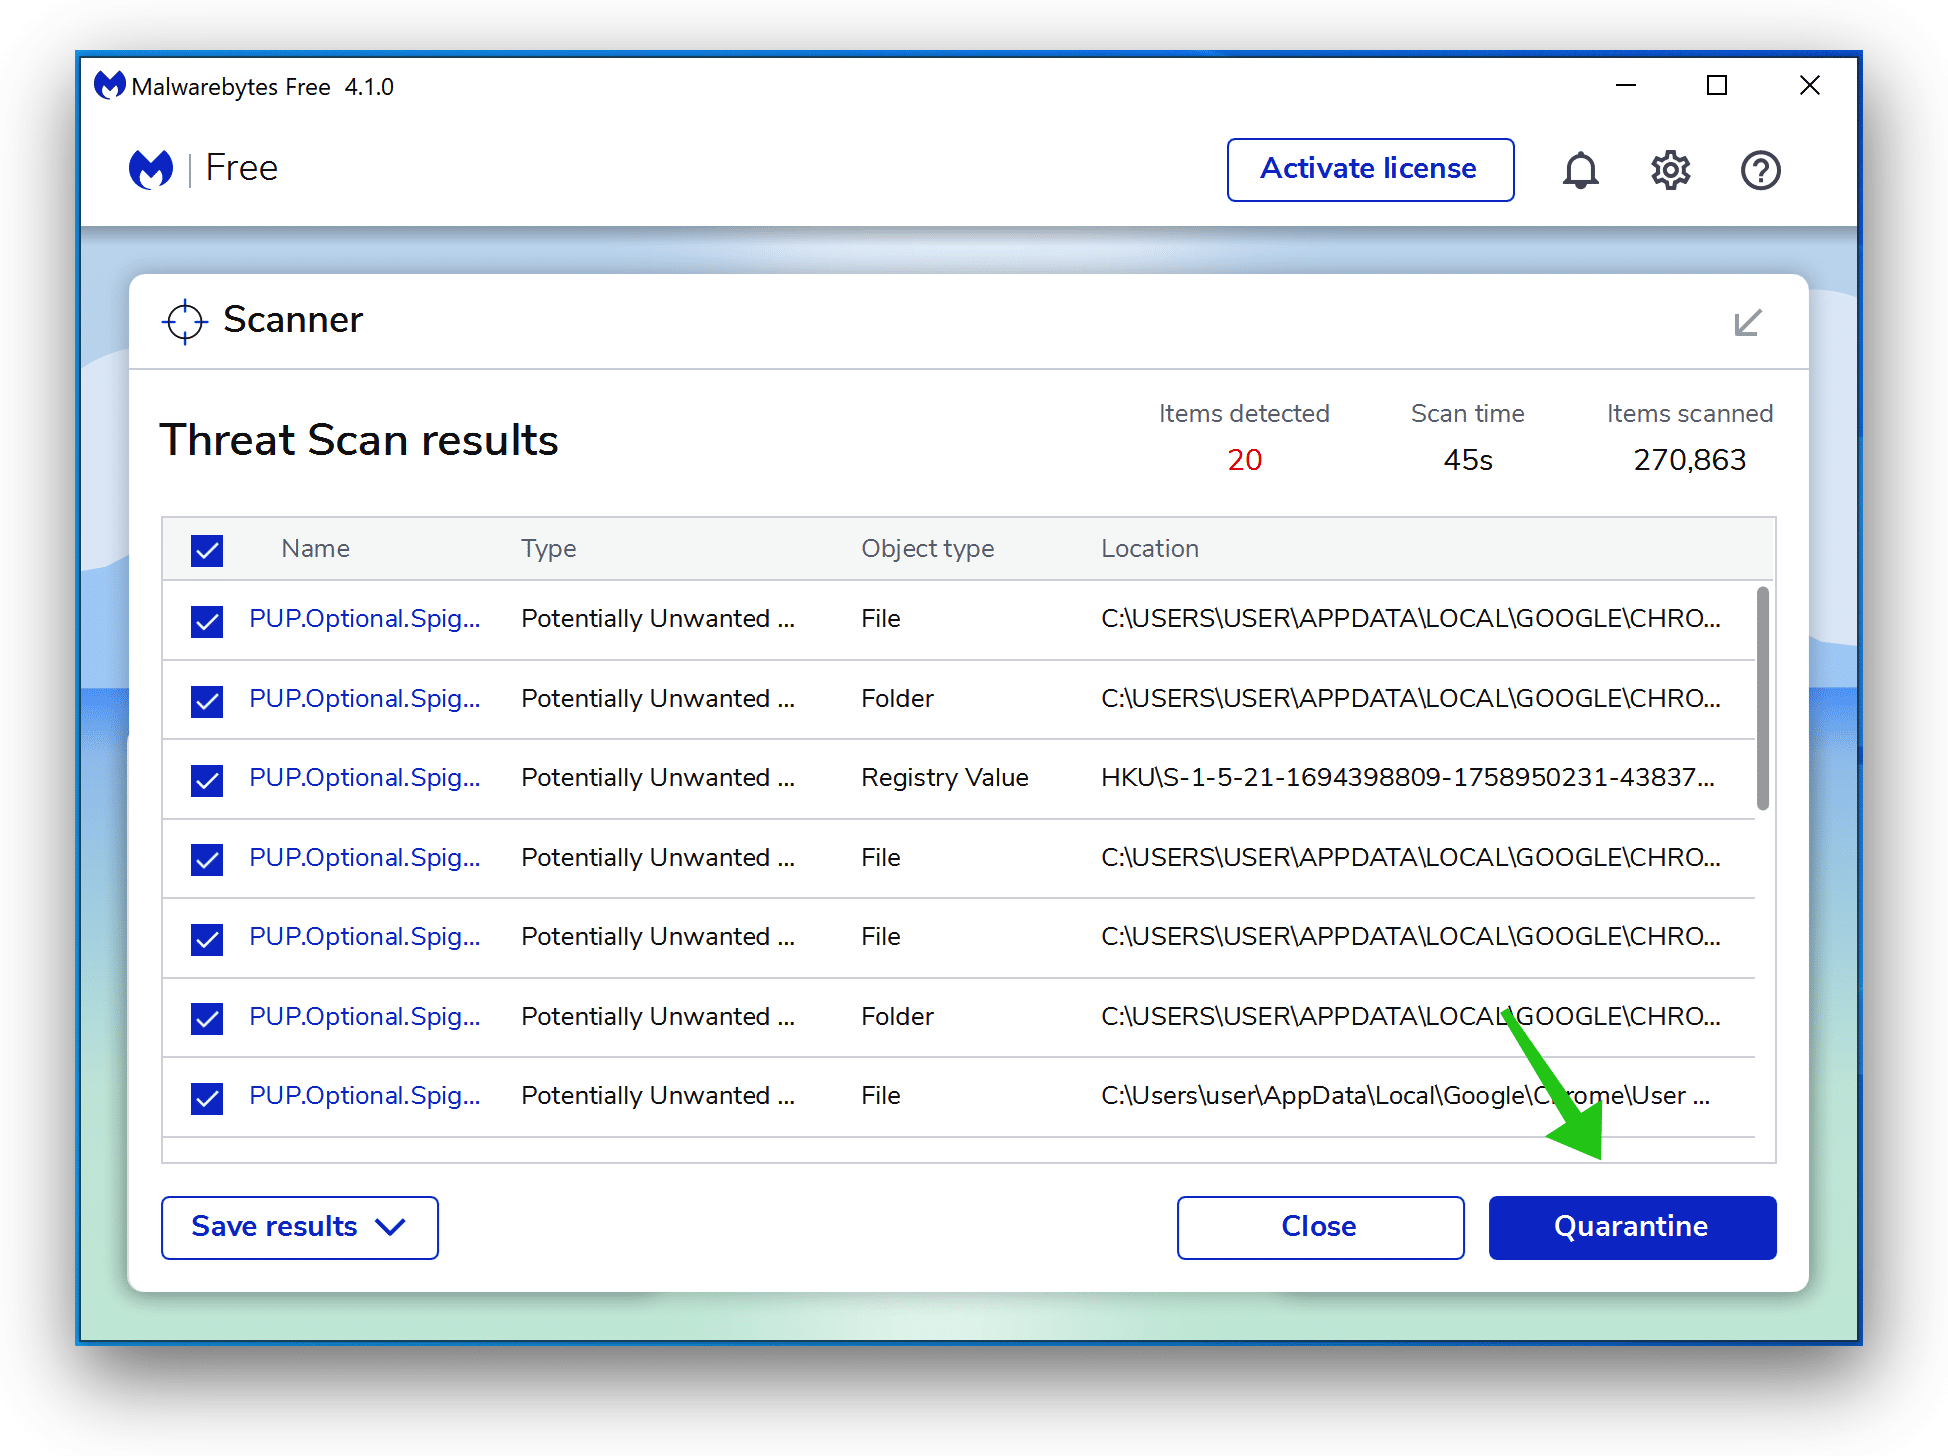 Discussmercurydifferently.com removal with Malwarebytes